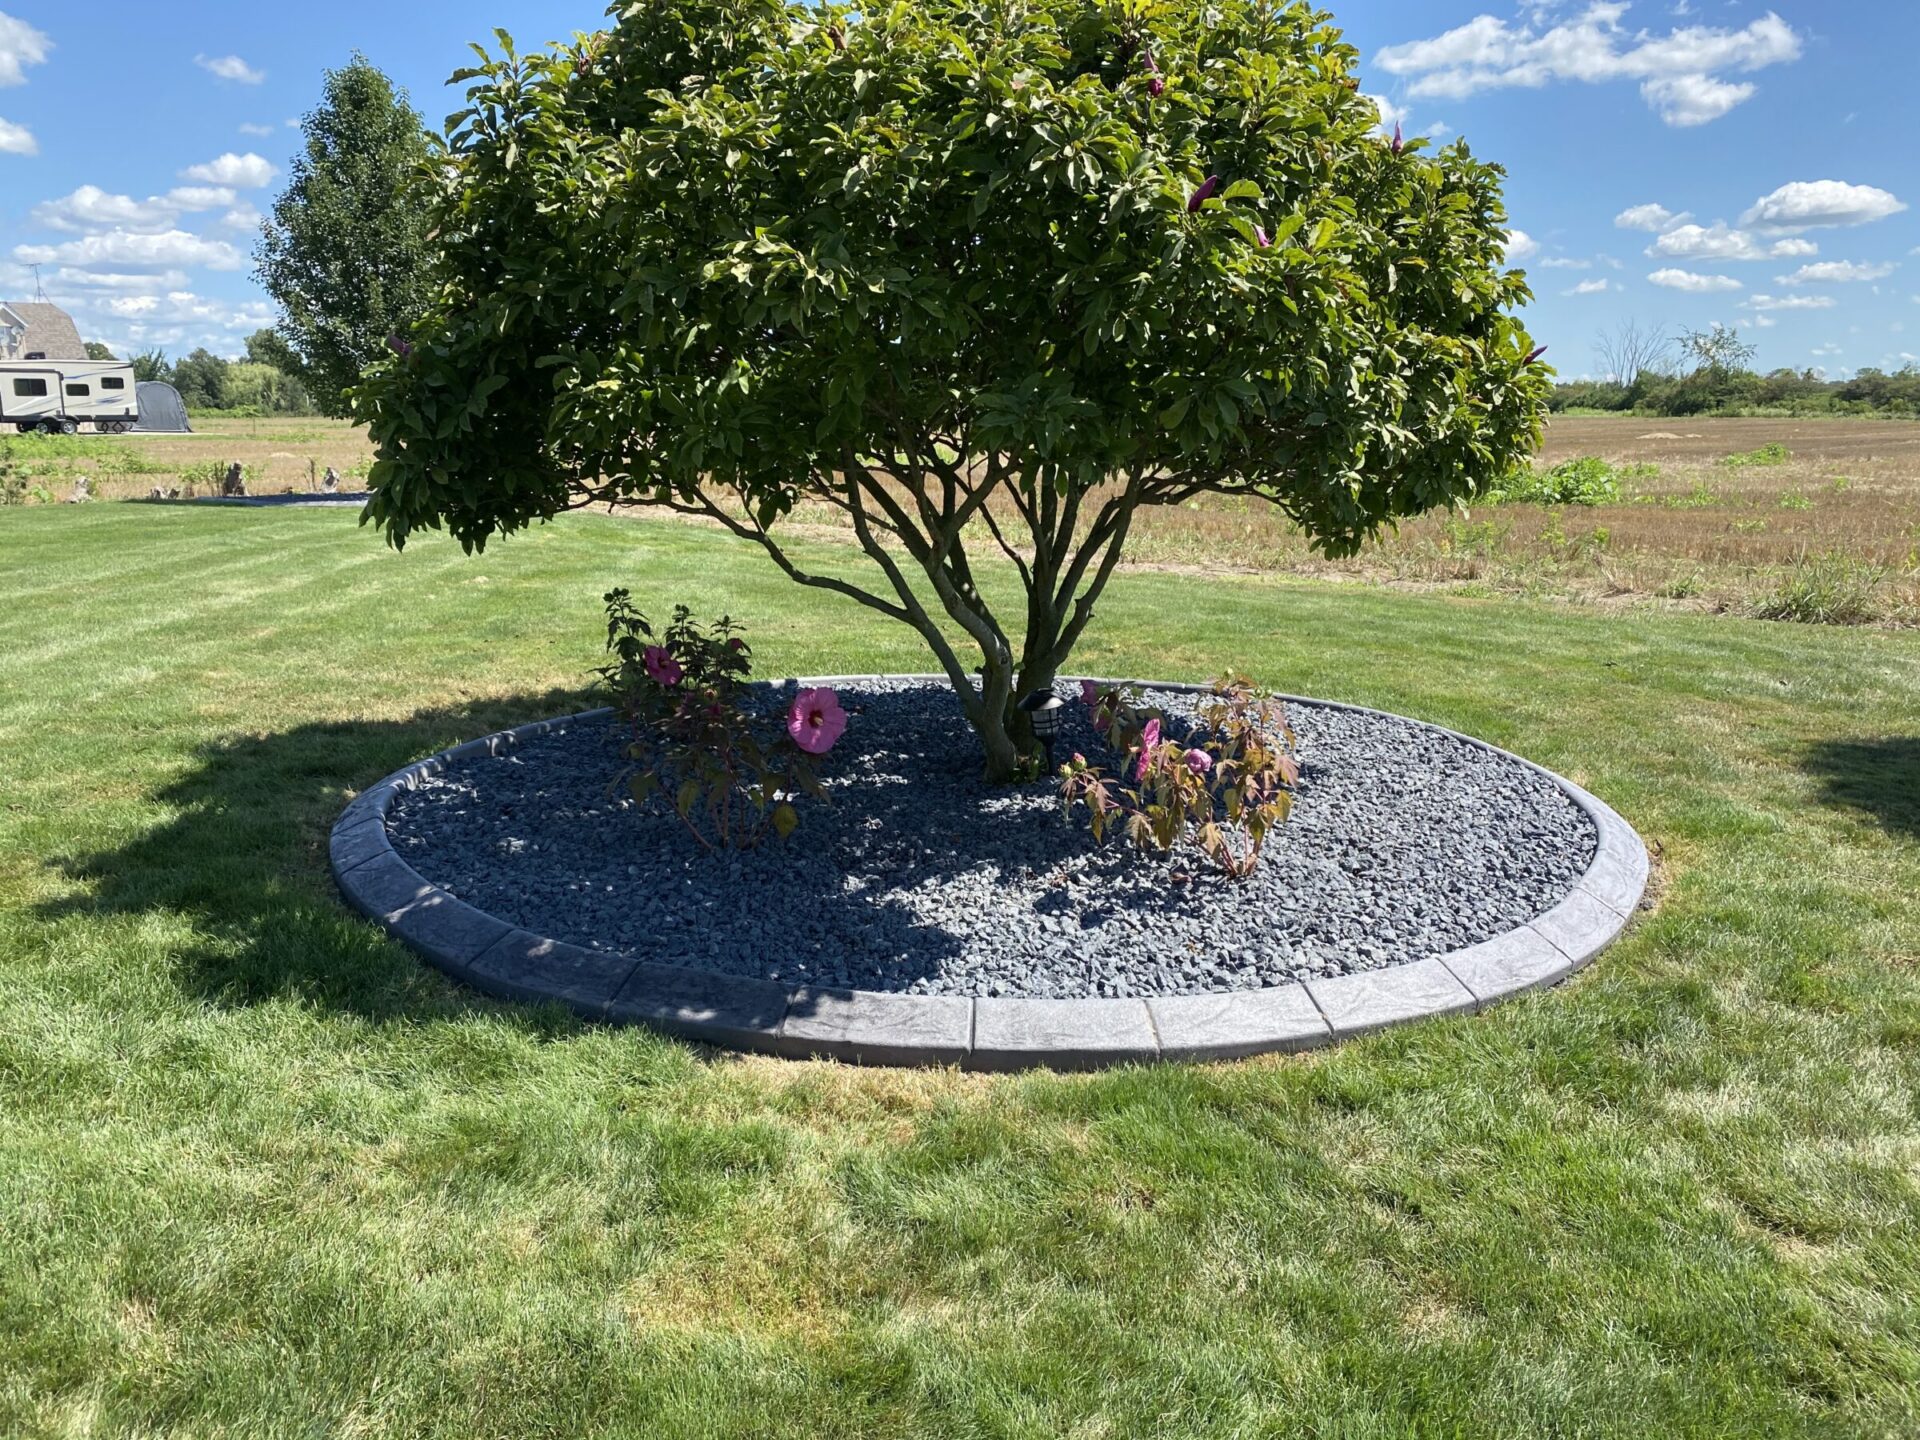 A neatly landscaped circular garden area with a large tree, flowering shrubs, and a gravel bed surrounded by pavers, with a field and RV in the background.